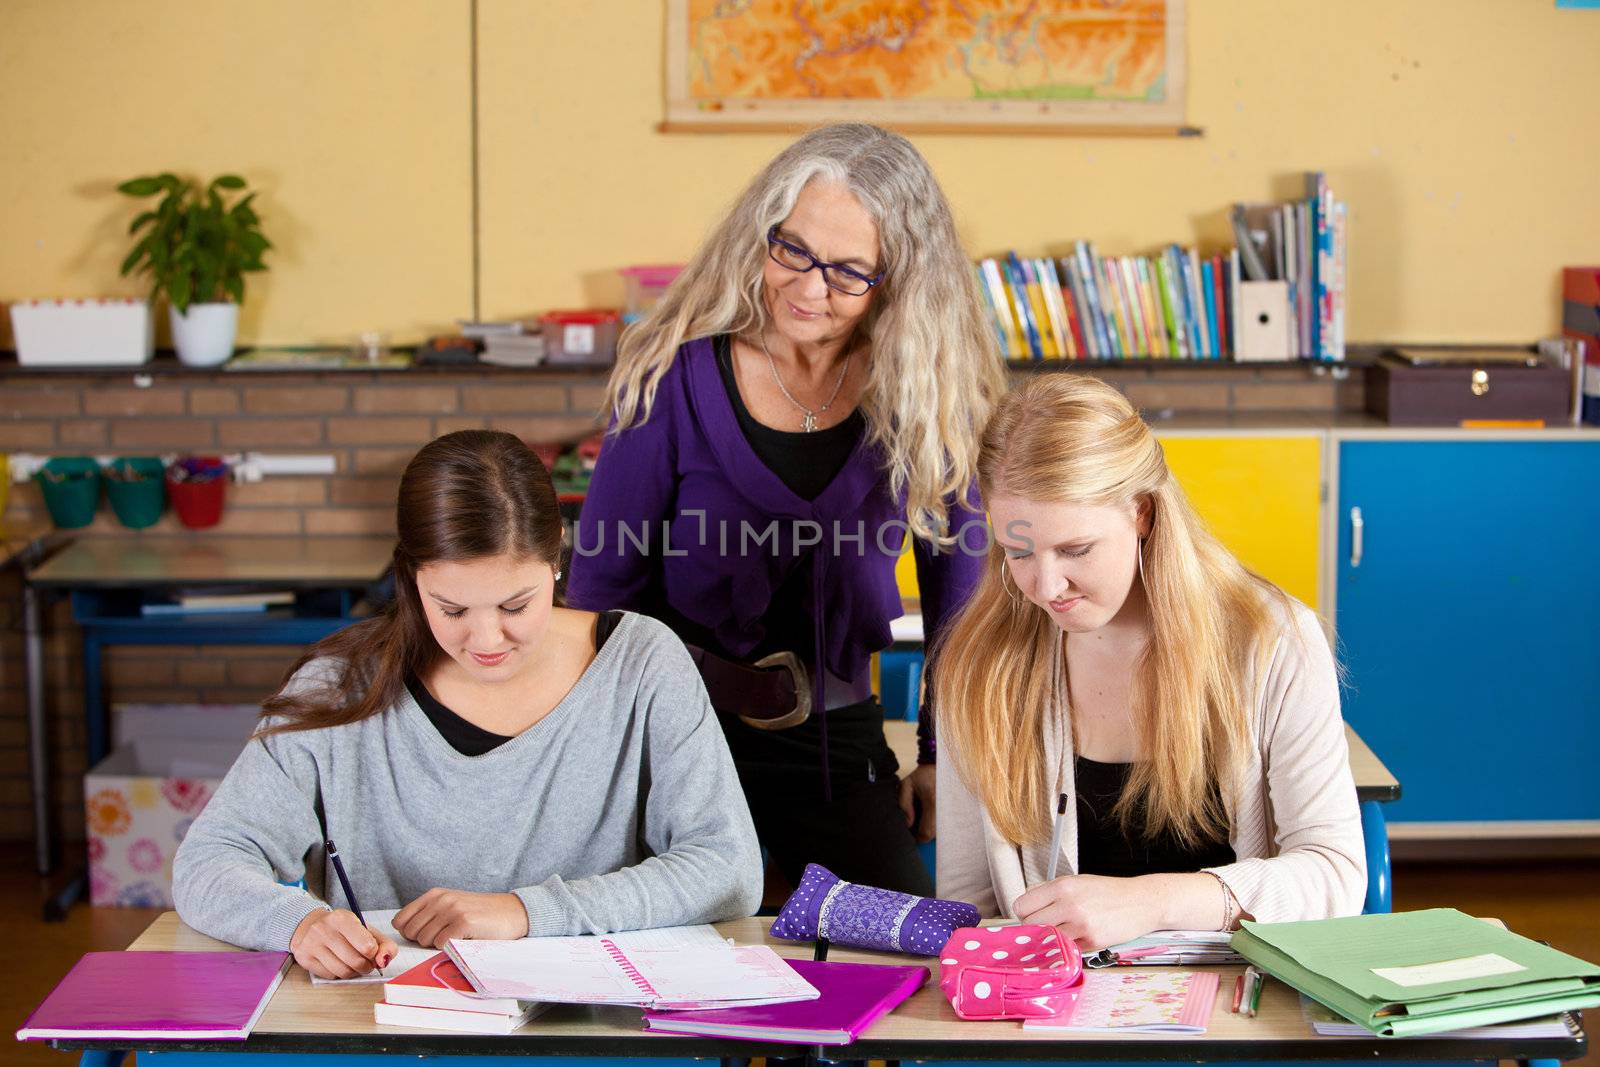 Teacher checking on her students by Fotosmurf